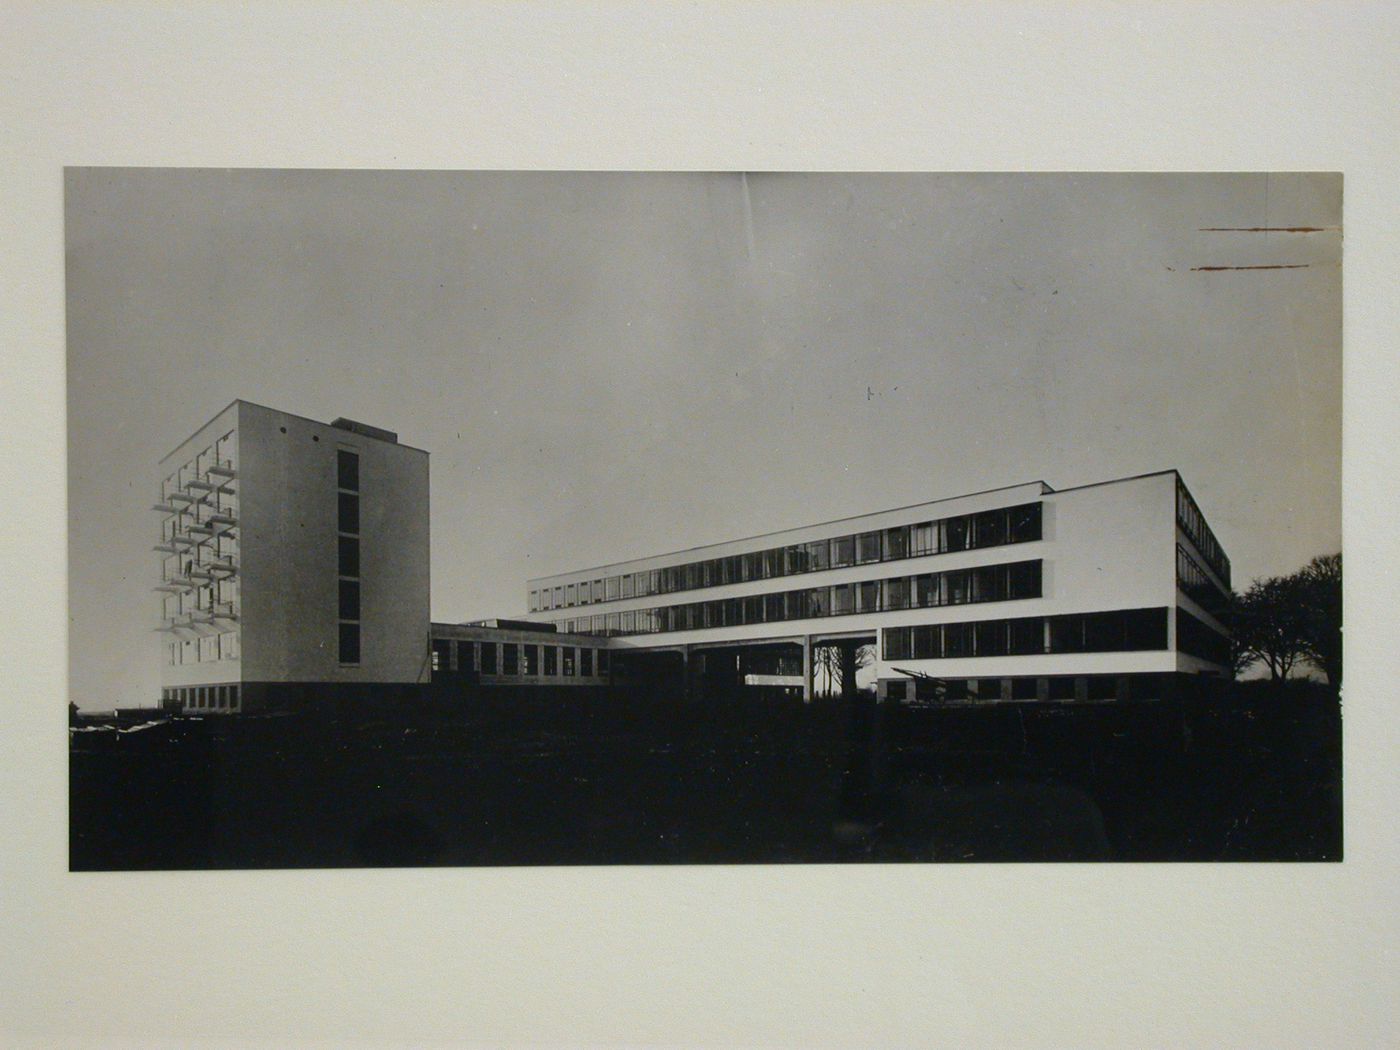 View of the Bauhaus by Walter Gropius, in Dessau, Germany